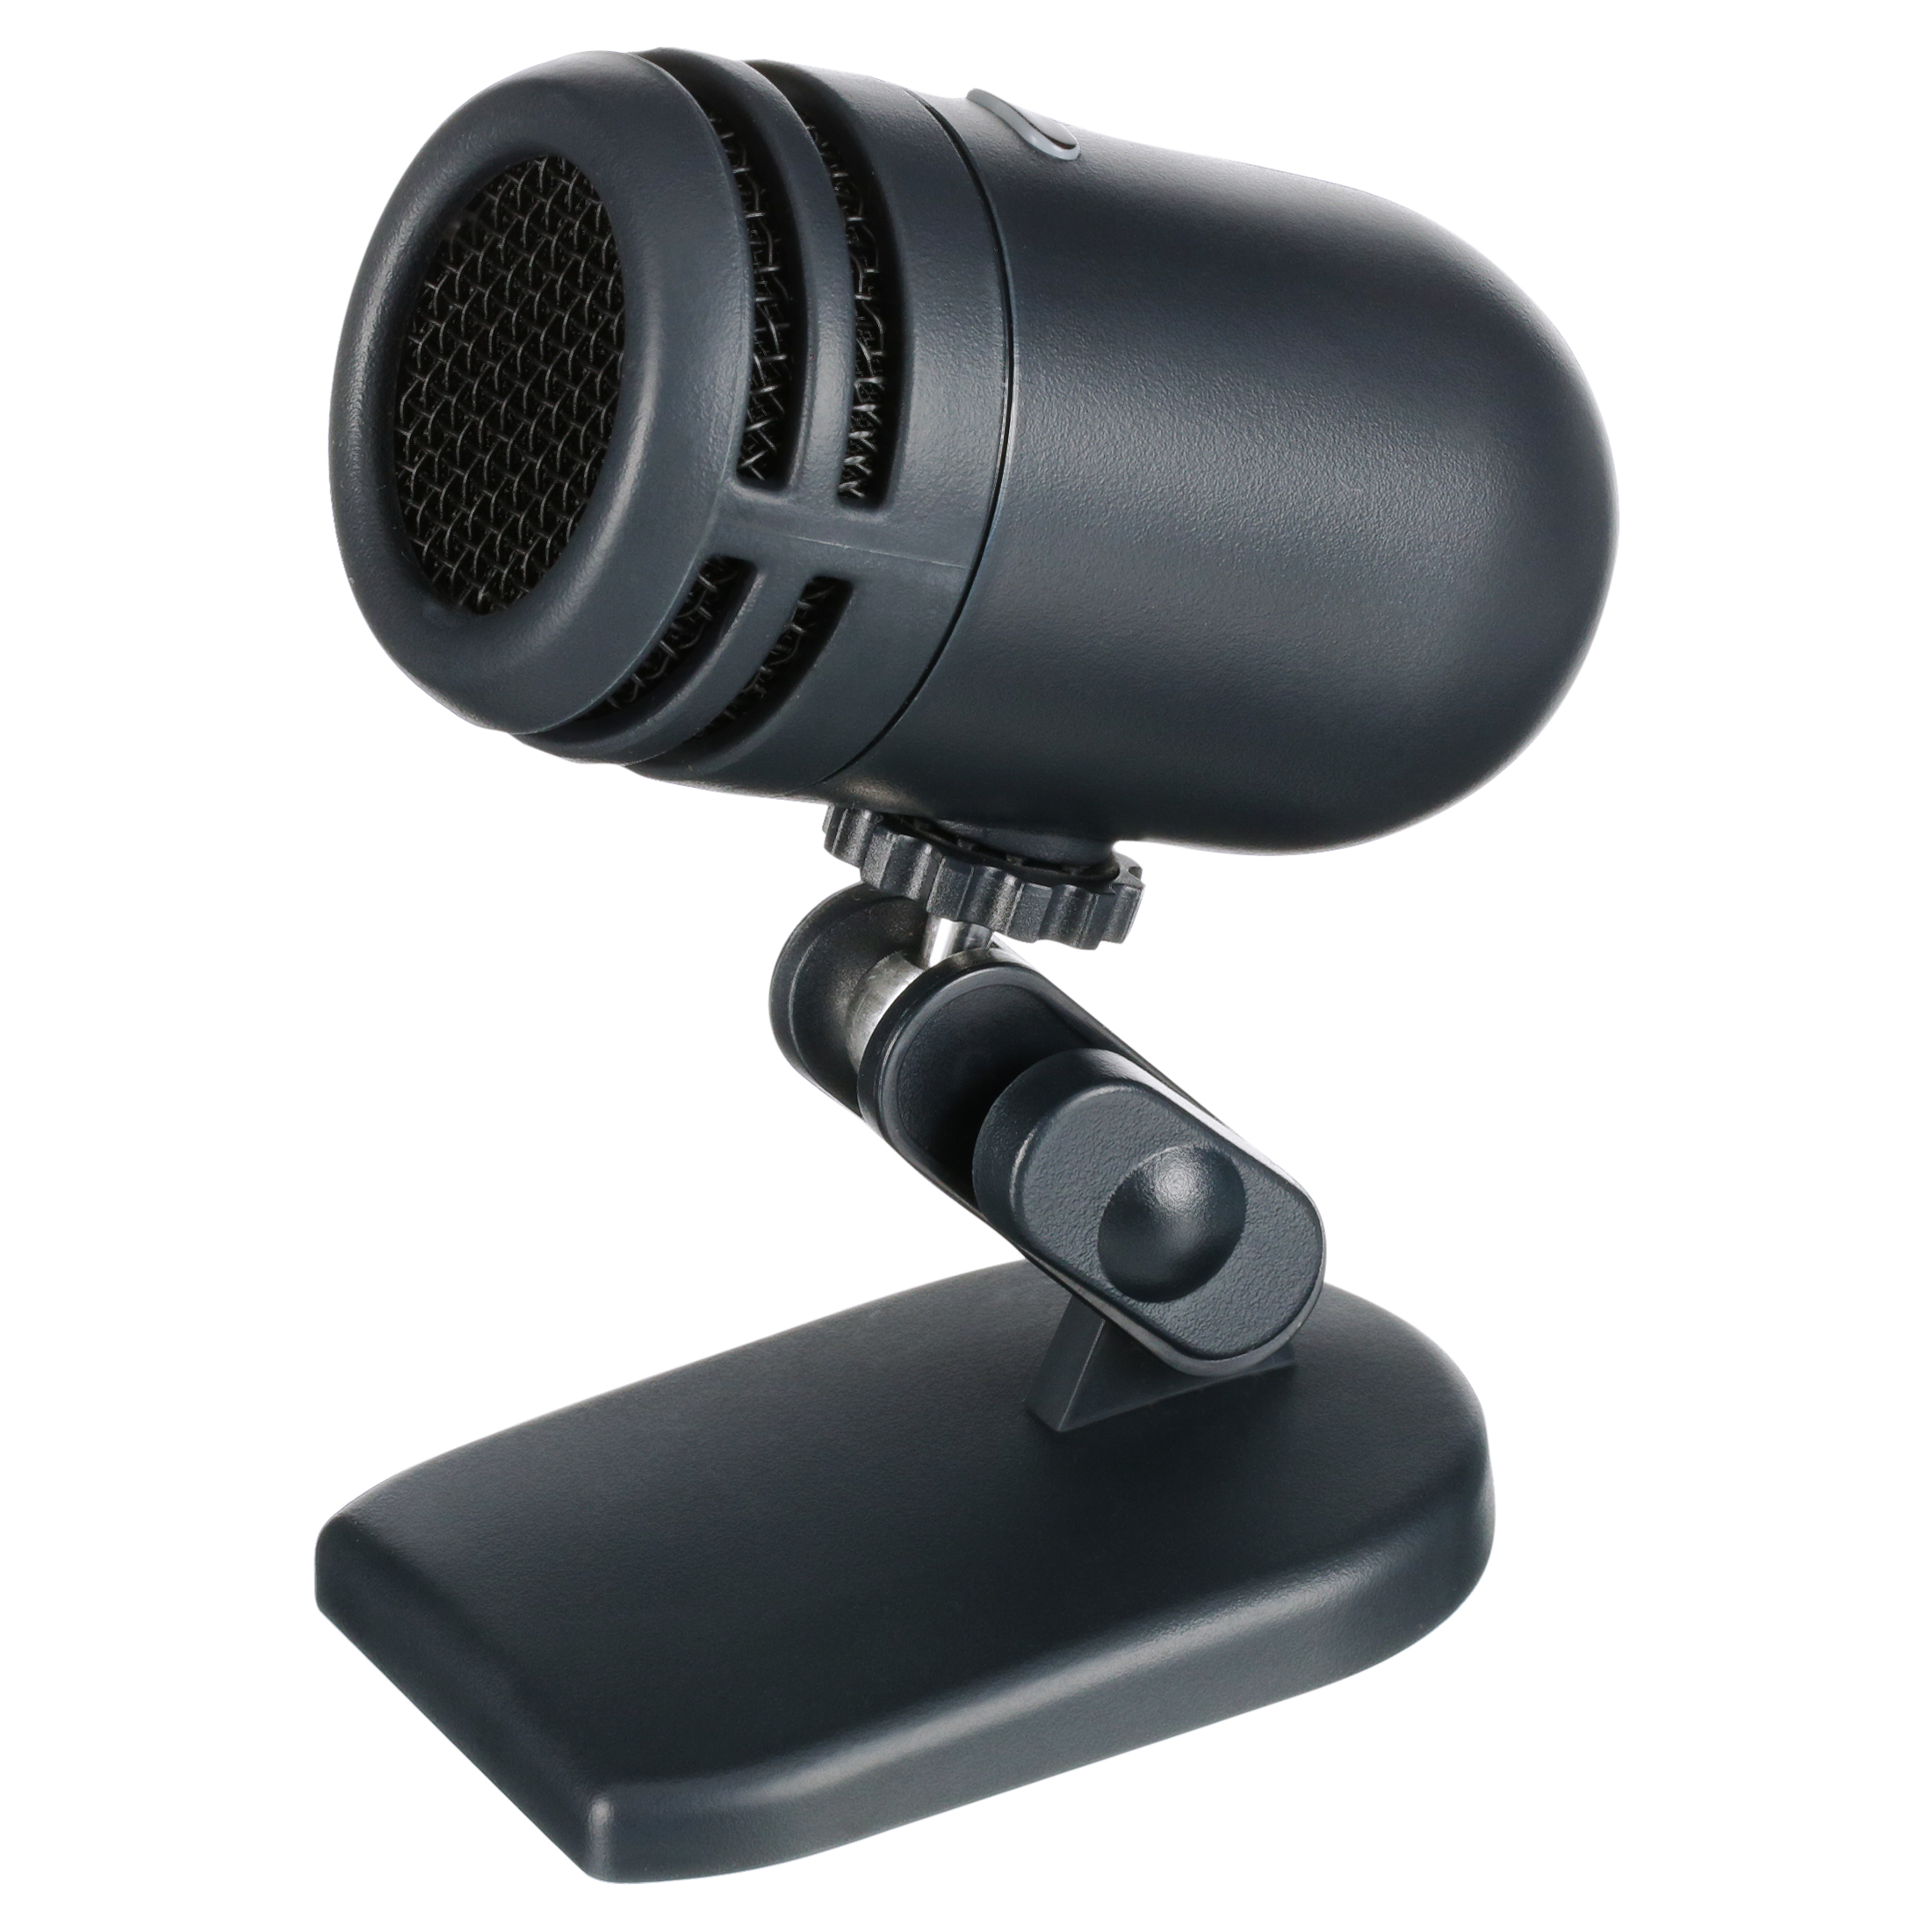 onn. USB Podcast Microphone with Cardioid Recording Pattern - image 5 of 9